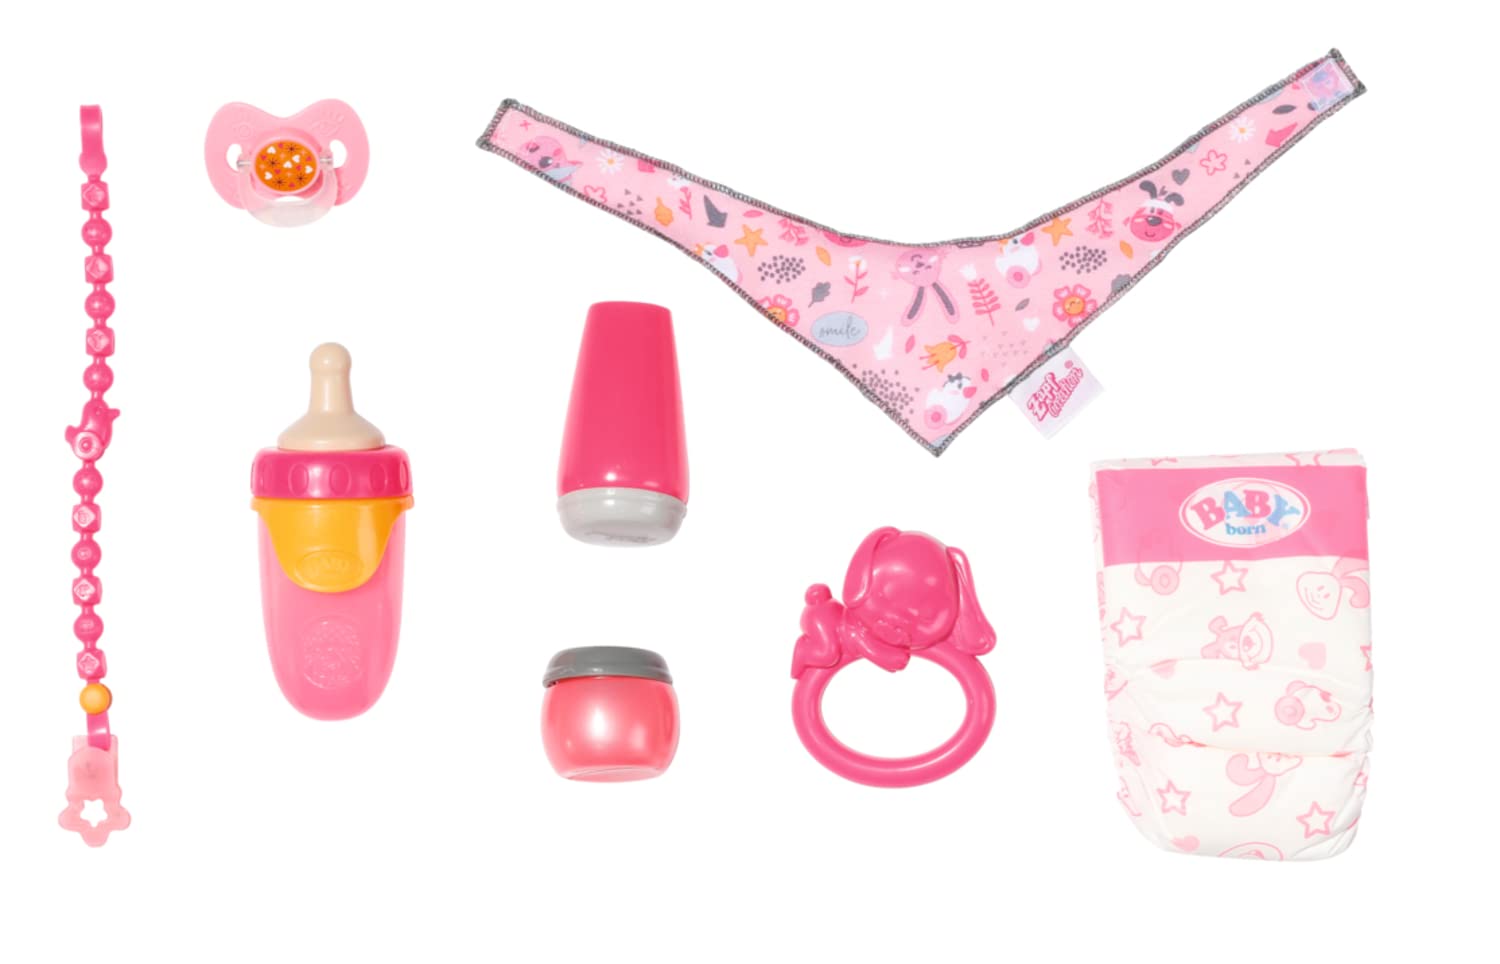 BABY born Starter Set 832851 - Accesories Dolls for Toddlers - Includes Magic Eyes Dummy & Dummy Chain, Nappy, Ring Toy, Powder Bottle, Cream Tube, Bottle & Neckerchief